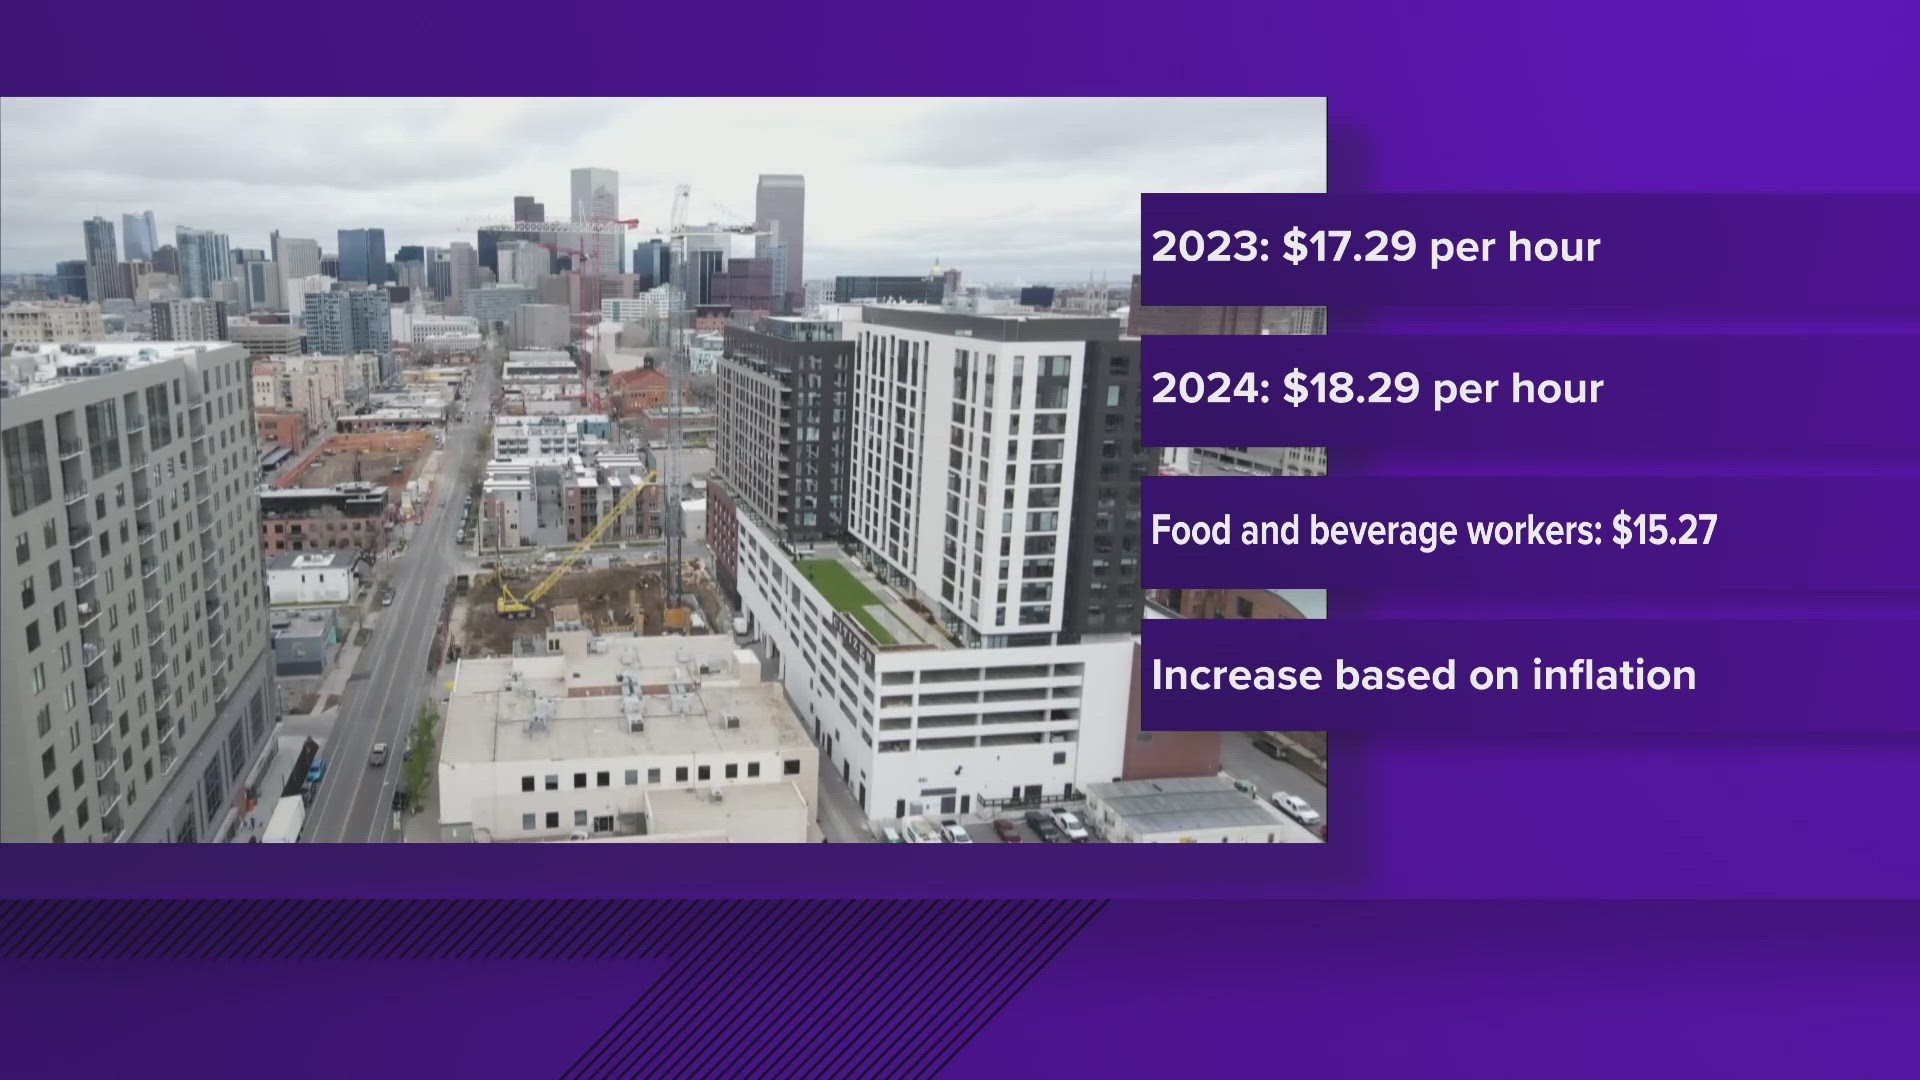 Minimum wage in Denver will go up from $17.29 to $18.29 per hour.